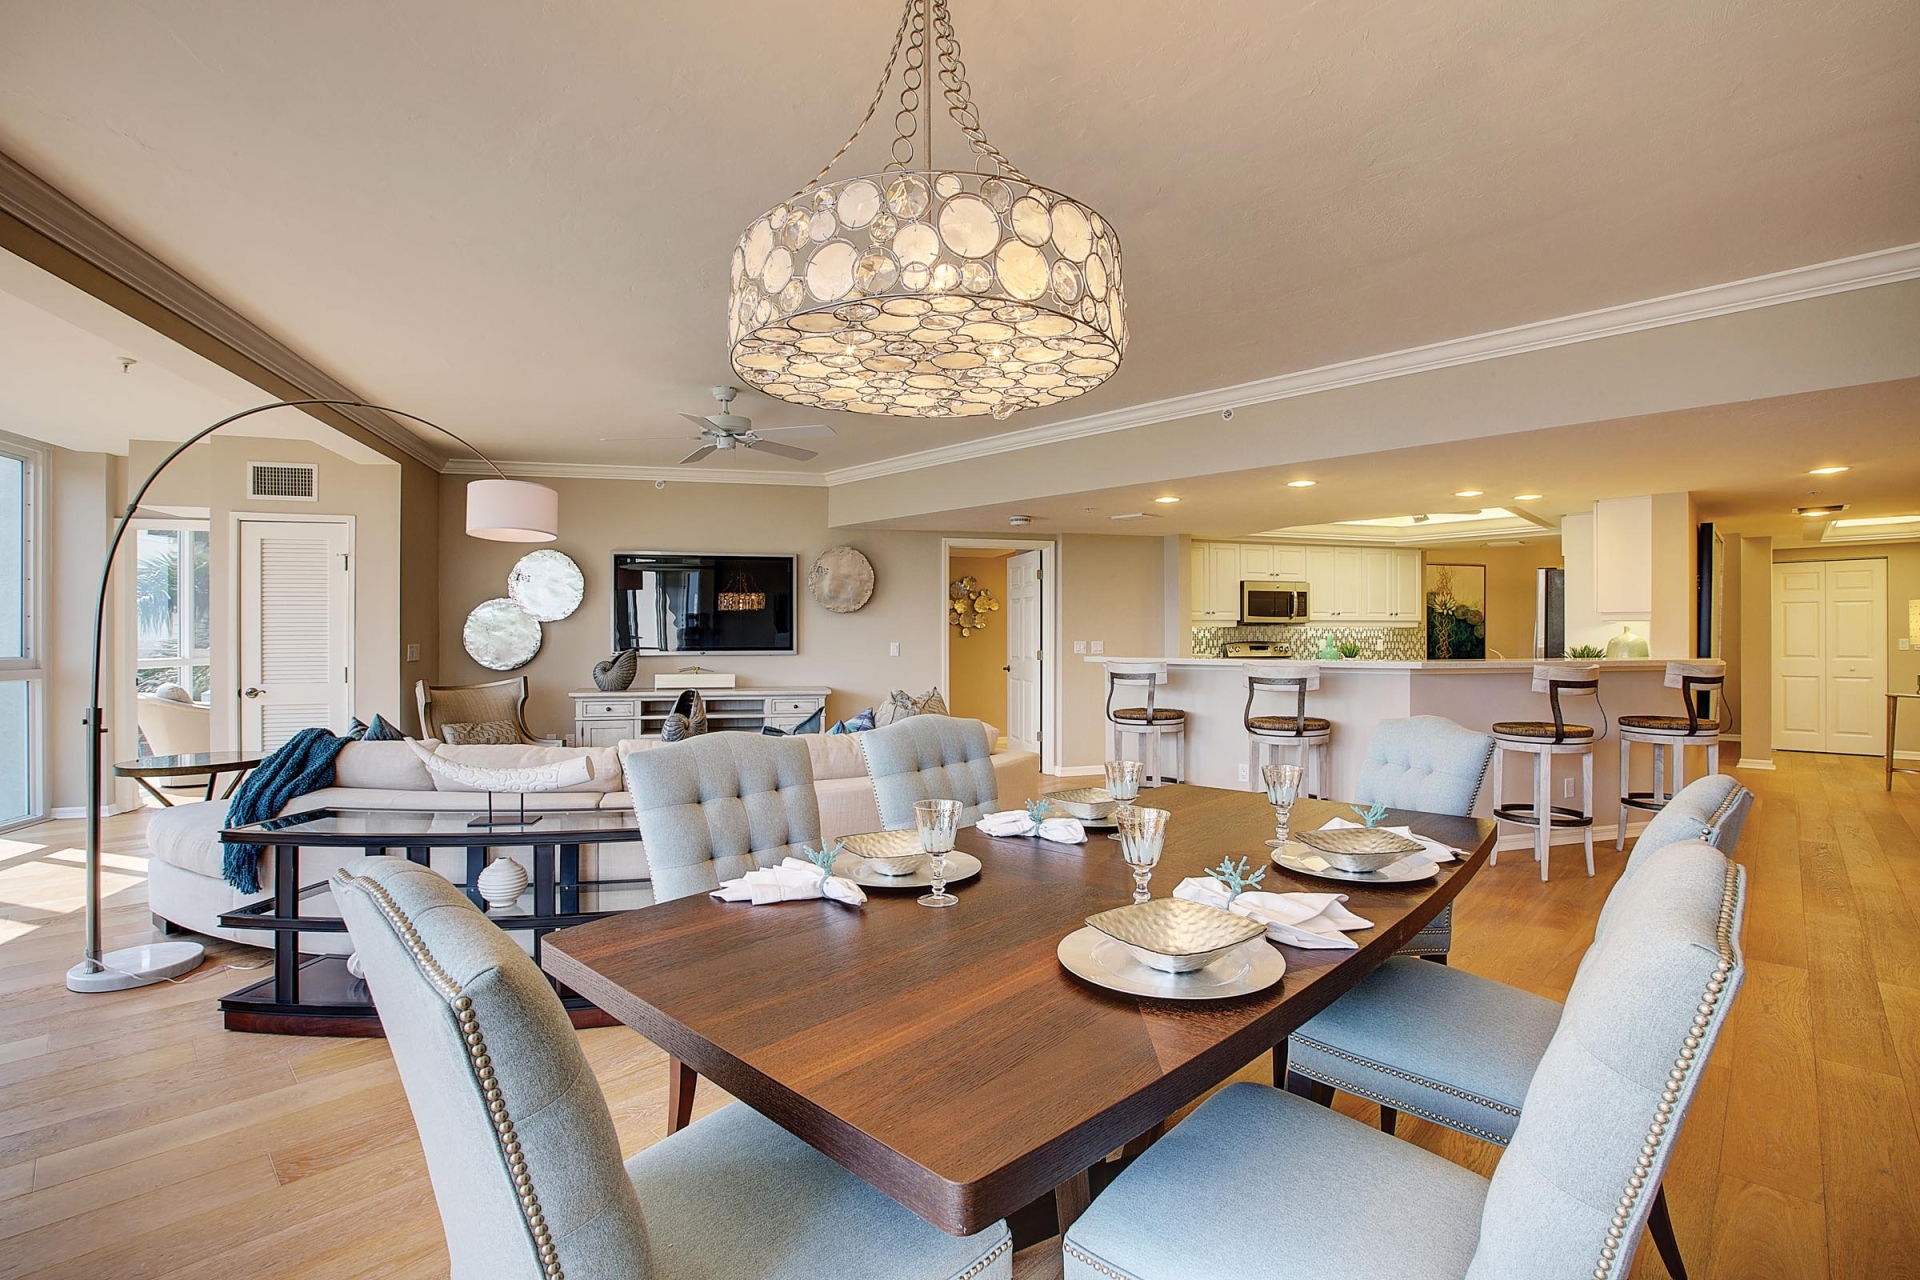 The dining room at the Oakmont Model Home at Shell Point Retirement Community